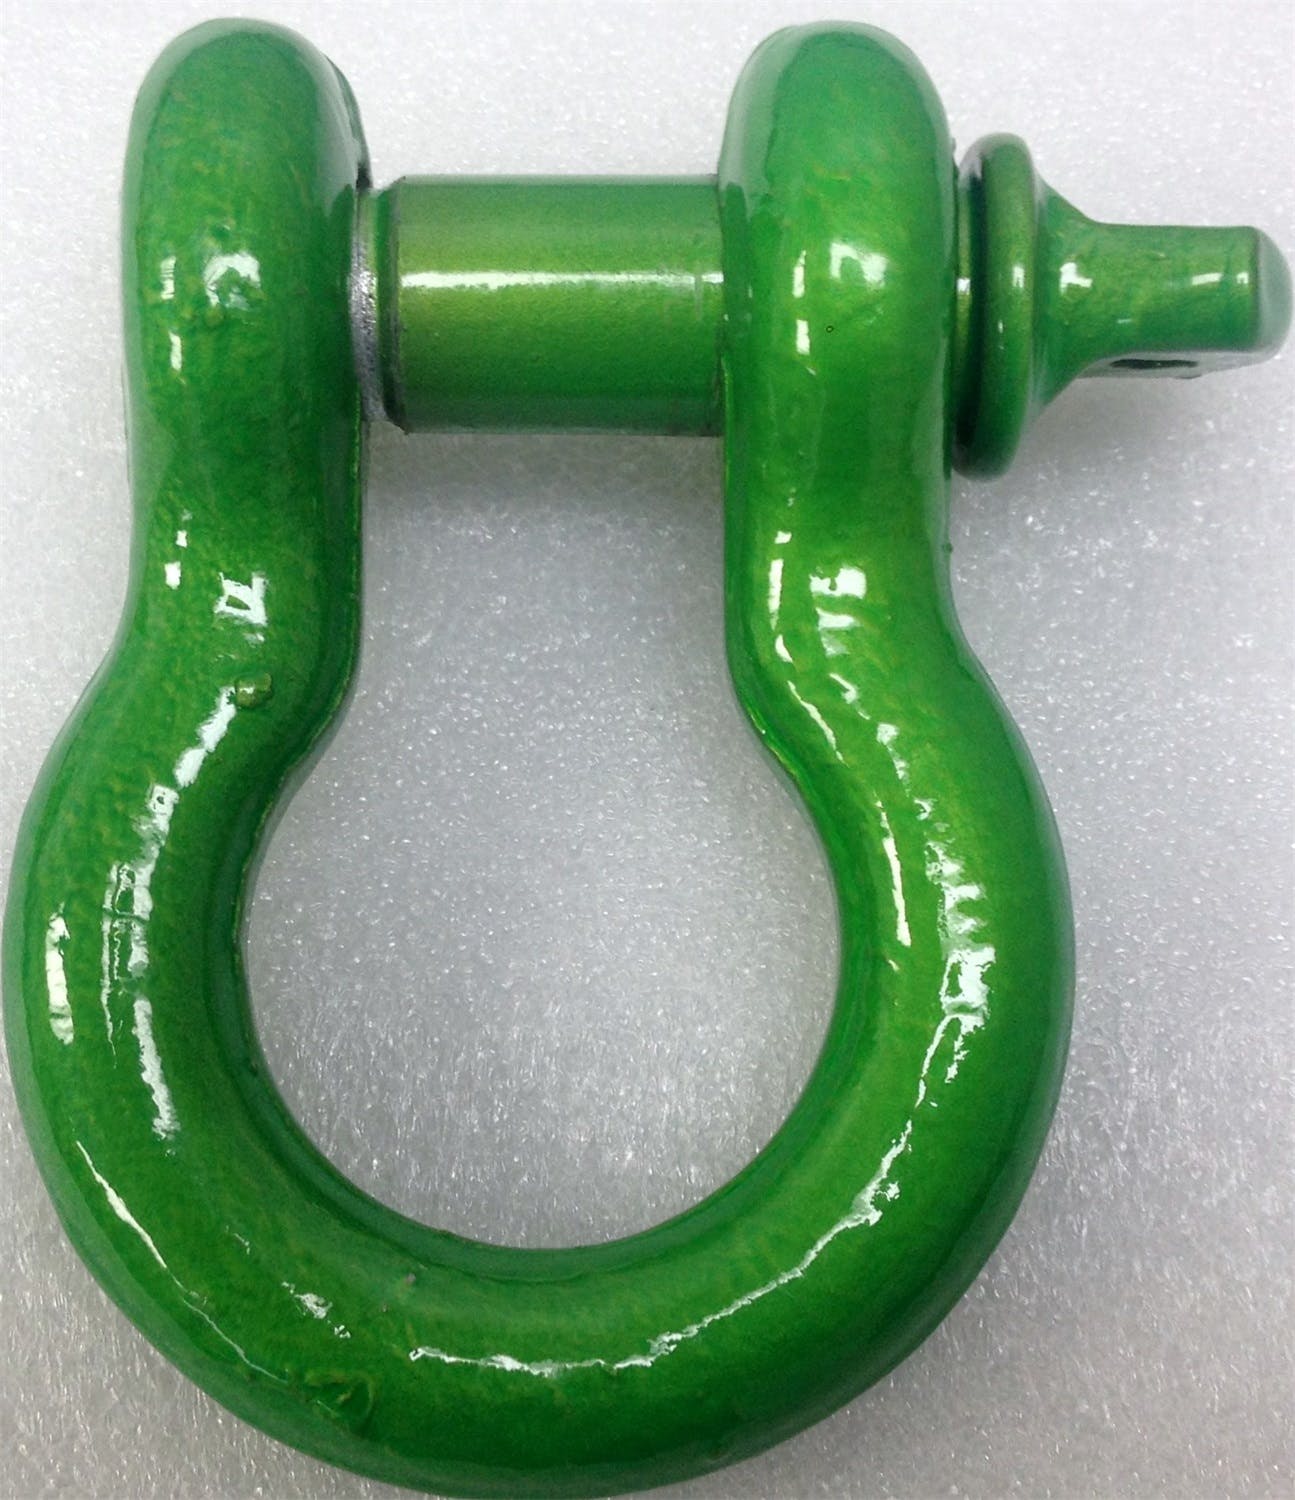 Iron Cross Automotive 1000-05 3/4-inch Shackle Lime Green